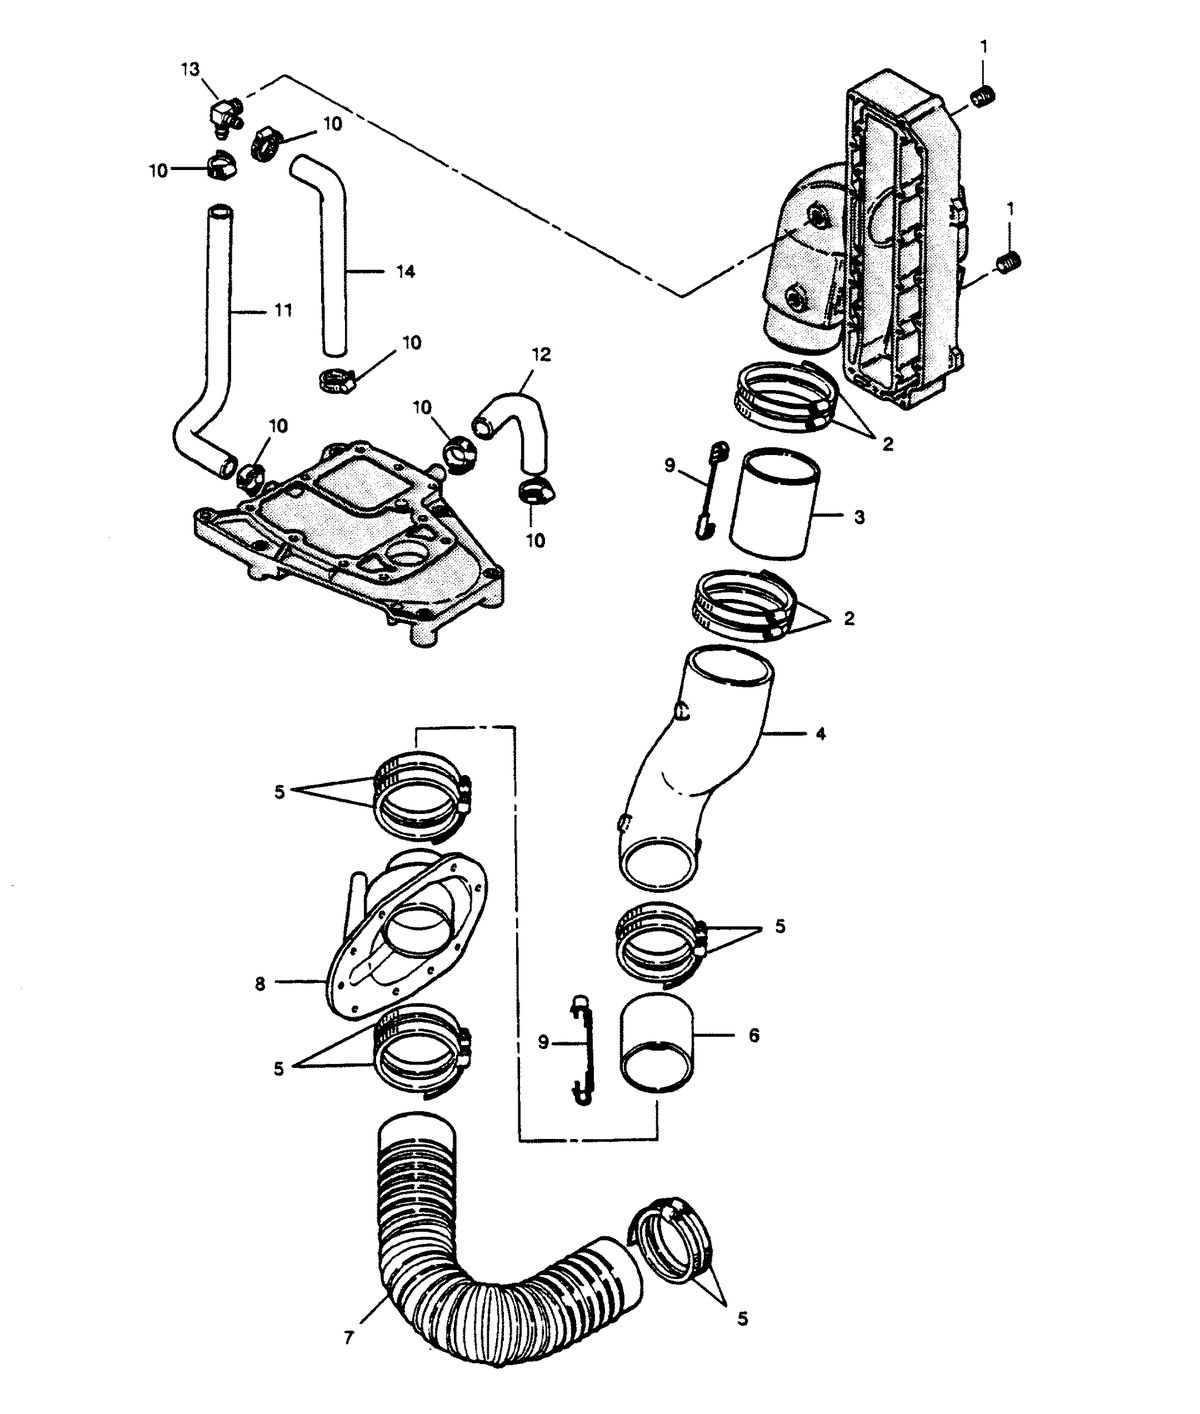 FORCE FORCE 1989 125 H.P. "B" MODELS-L-DRIVE EXHAUST SYSTEM